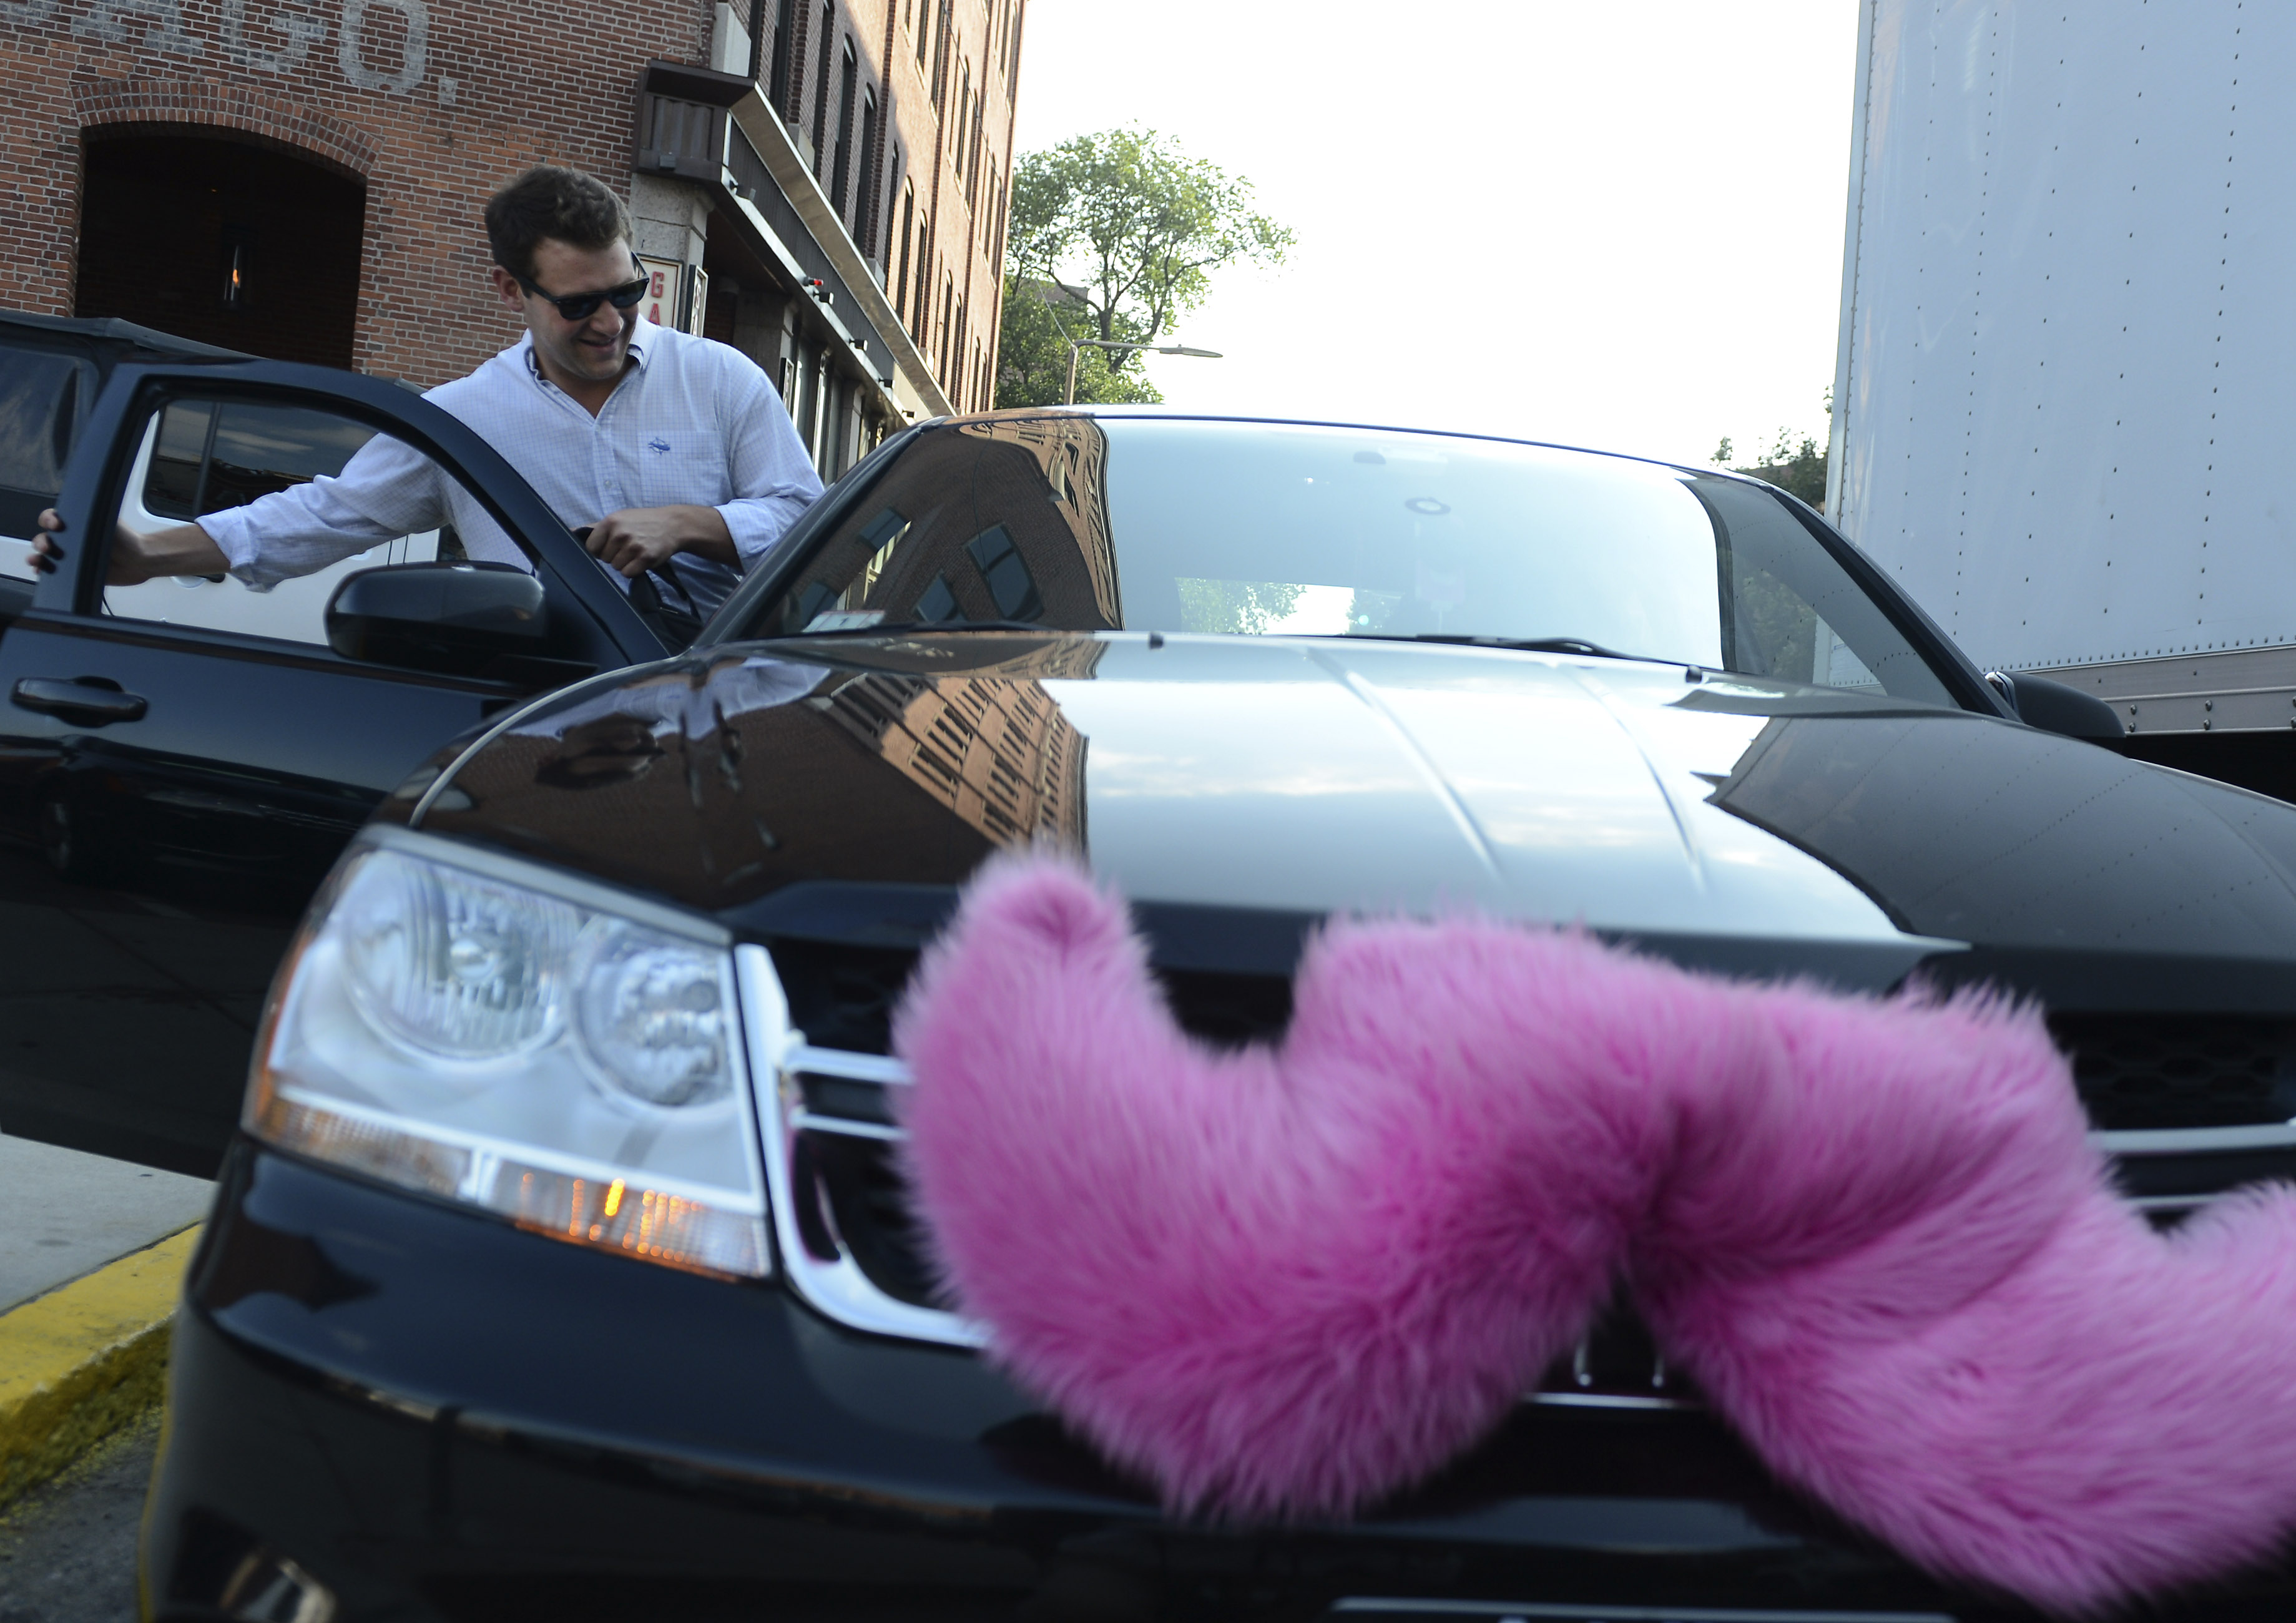 Hunter Perry, a regular Lyft user, gets picked up on July 16, 2013 near his office on Harrison Avenue. (Boston Globe—Boston Globe/Getty Images)